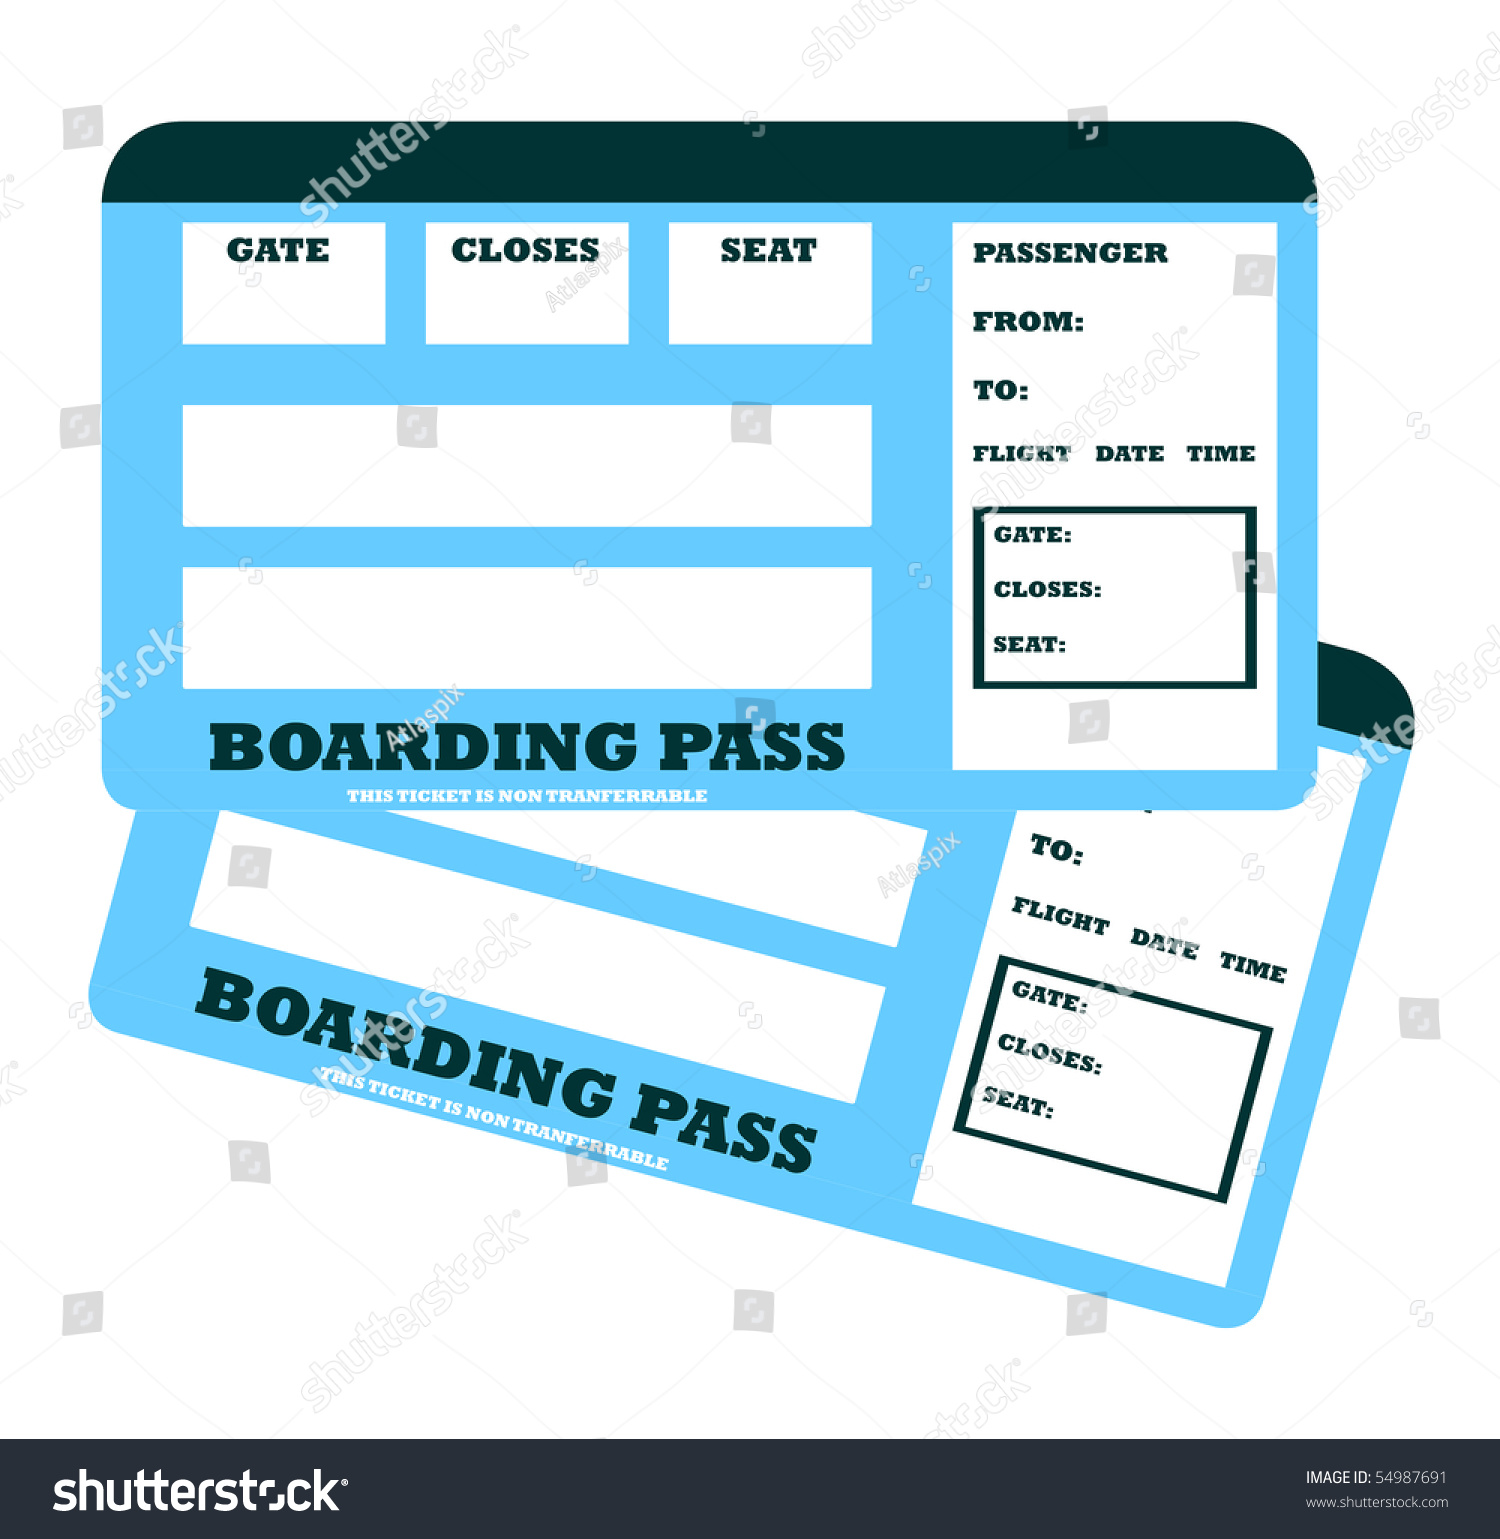 free clip art airline ticket - photo #24